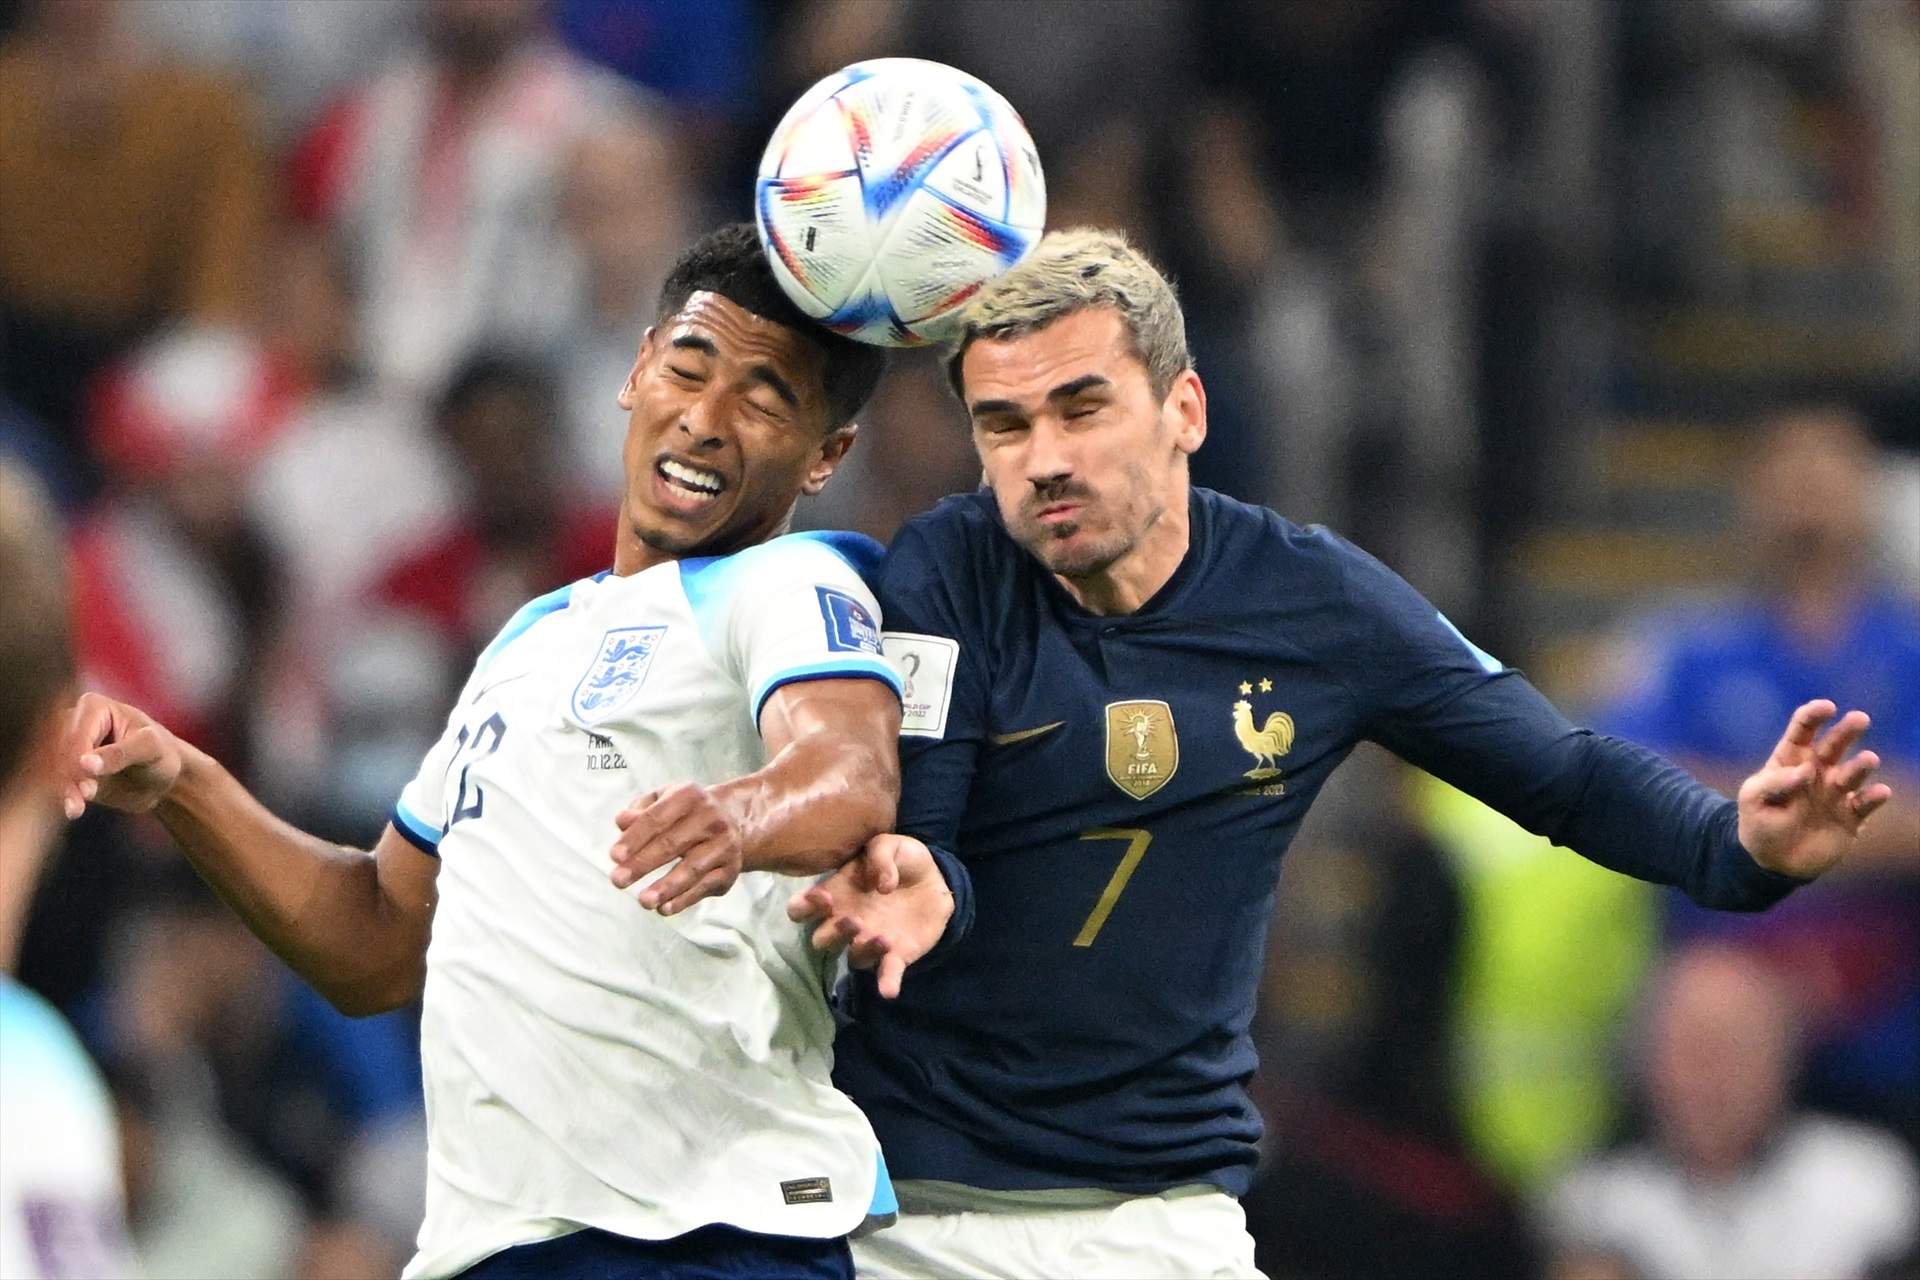 10 December 2022, Qatar, Al Khor: England's Jude Bellingham (L) and France's Antoine Griezmann battle for the ball during the FIFA World Cup Qatar 2022 Quarter-Final soccer match between England and France at the Al Bayt Stadium. Photo: Robert Michael/dpa